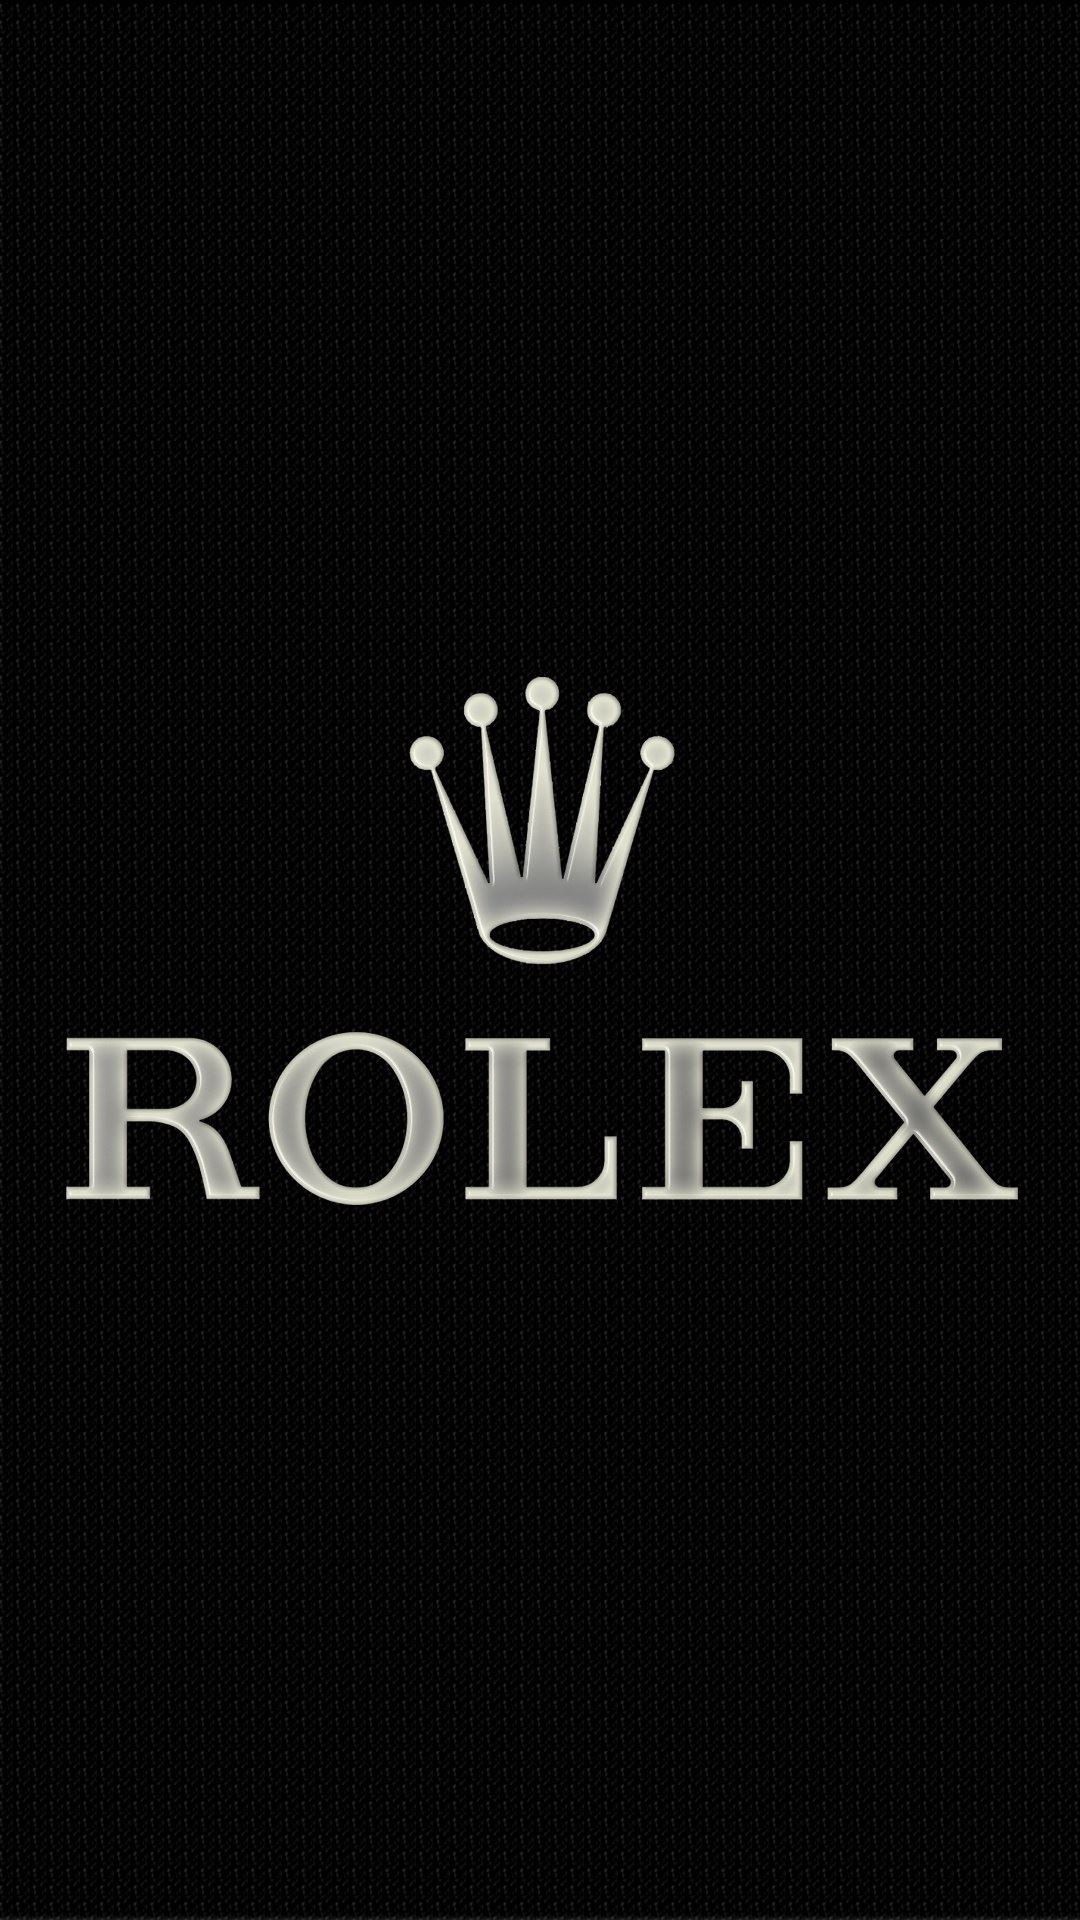 1080x1920 Rolex Logo Black And White Android Wallpaper ...